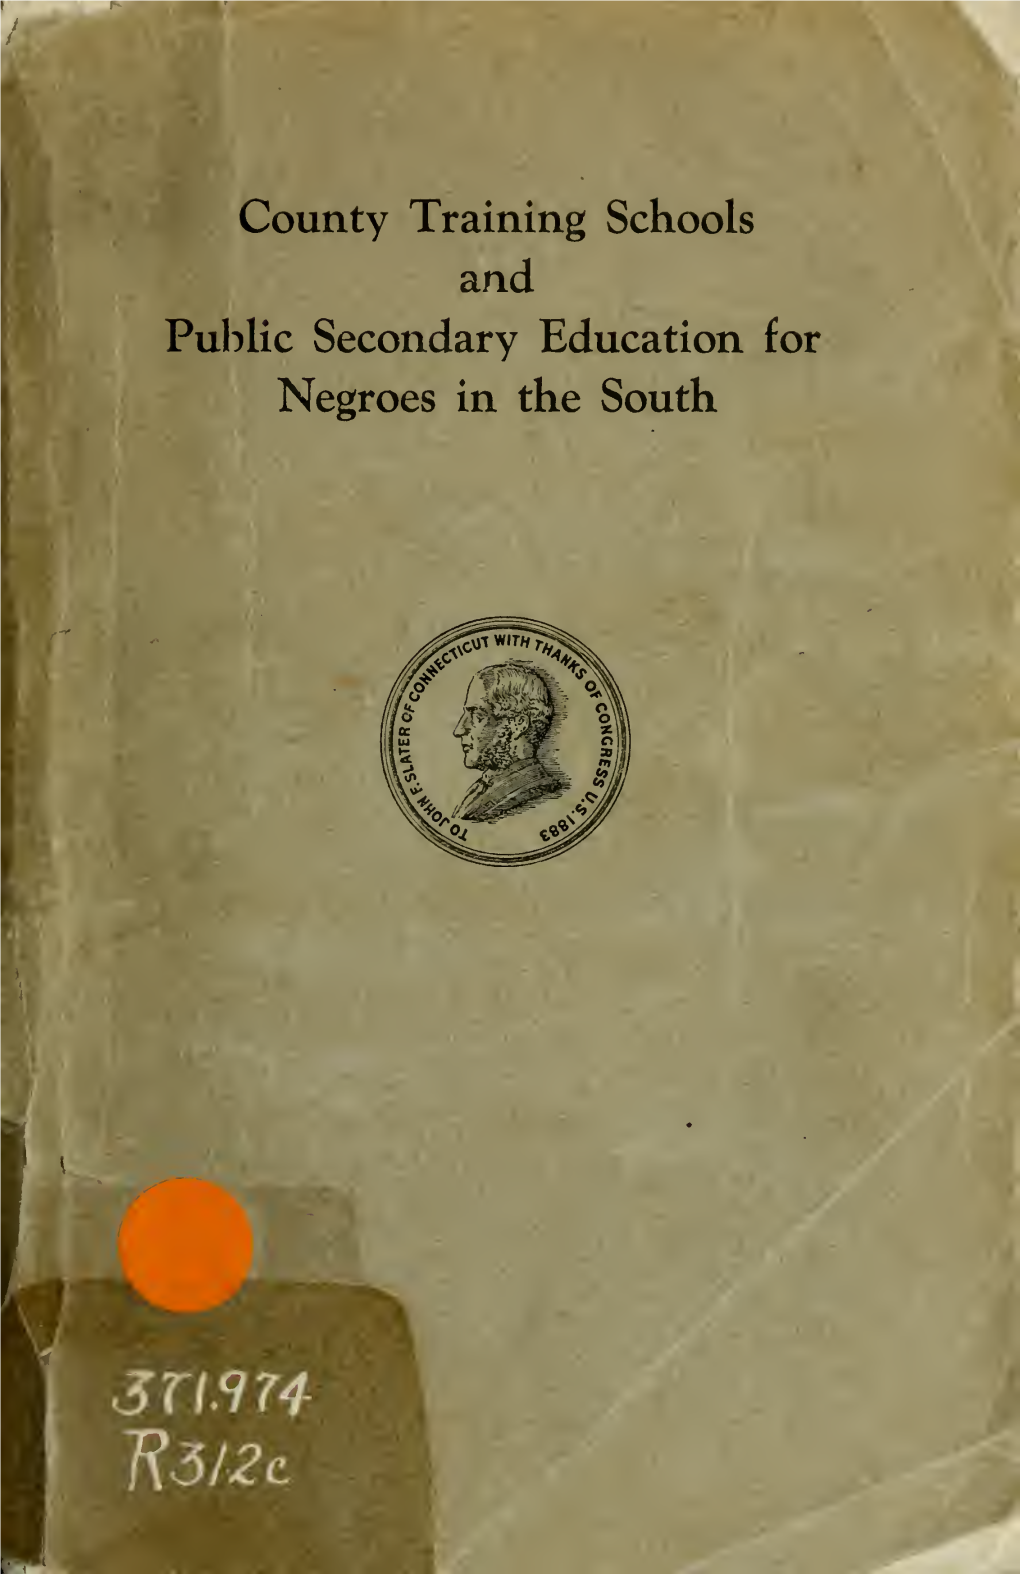 County Training Schools and Public Secondary Education for Negroes in the South